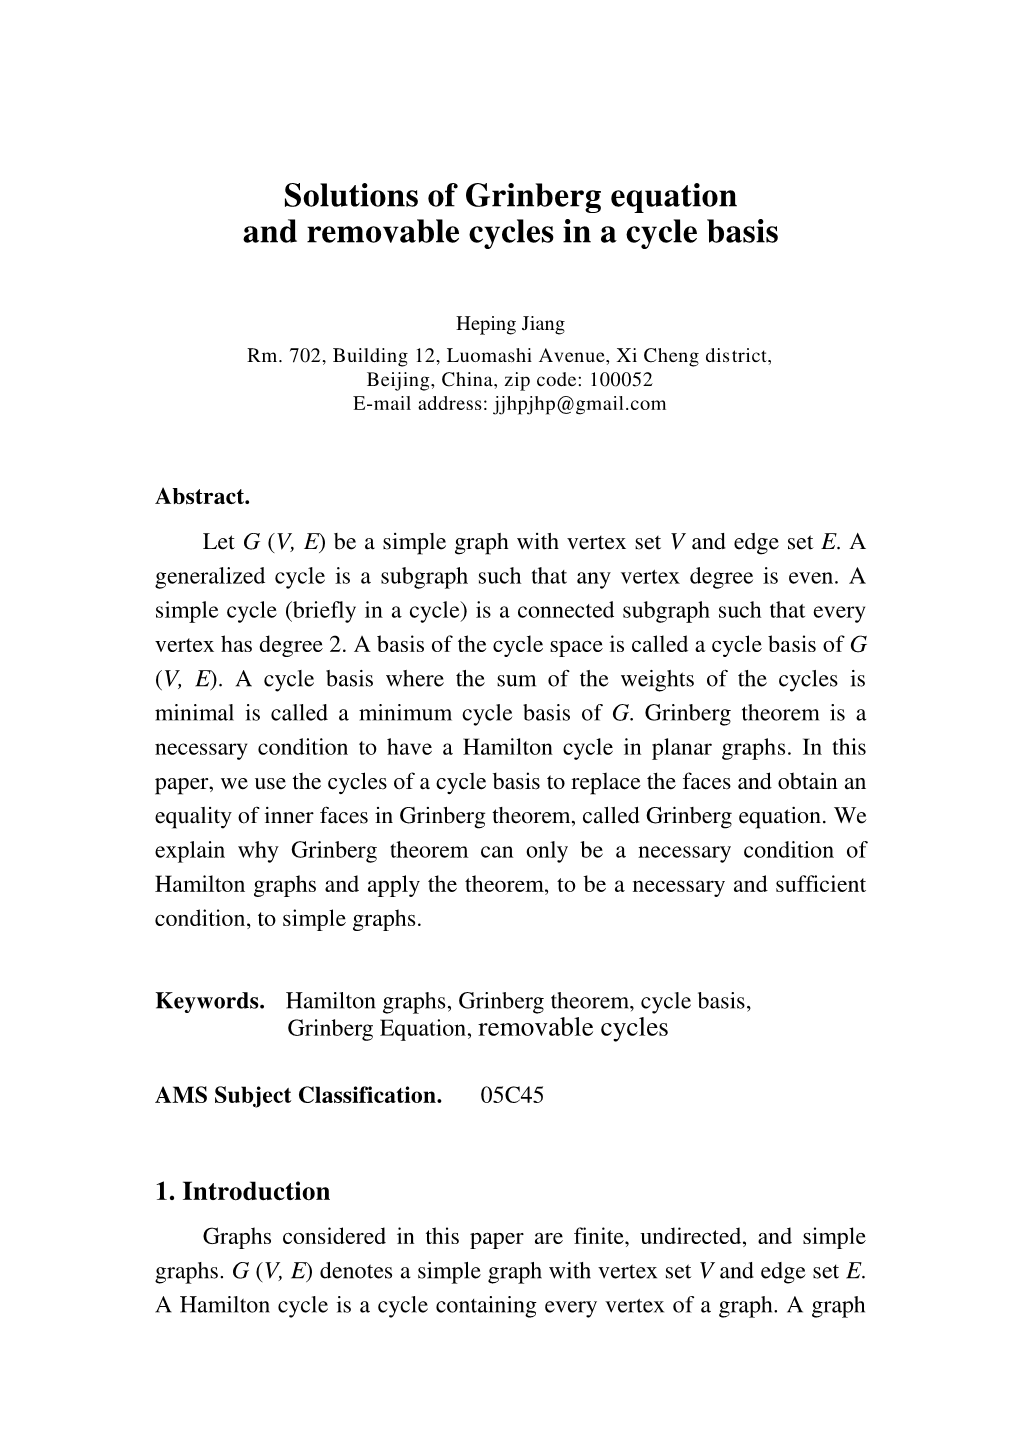 Solutions of Grinberg Equation and Removable Cycles in a Cycle Basis